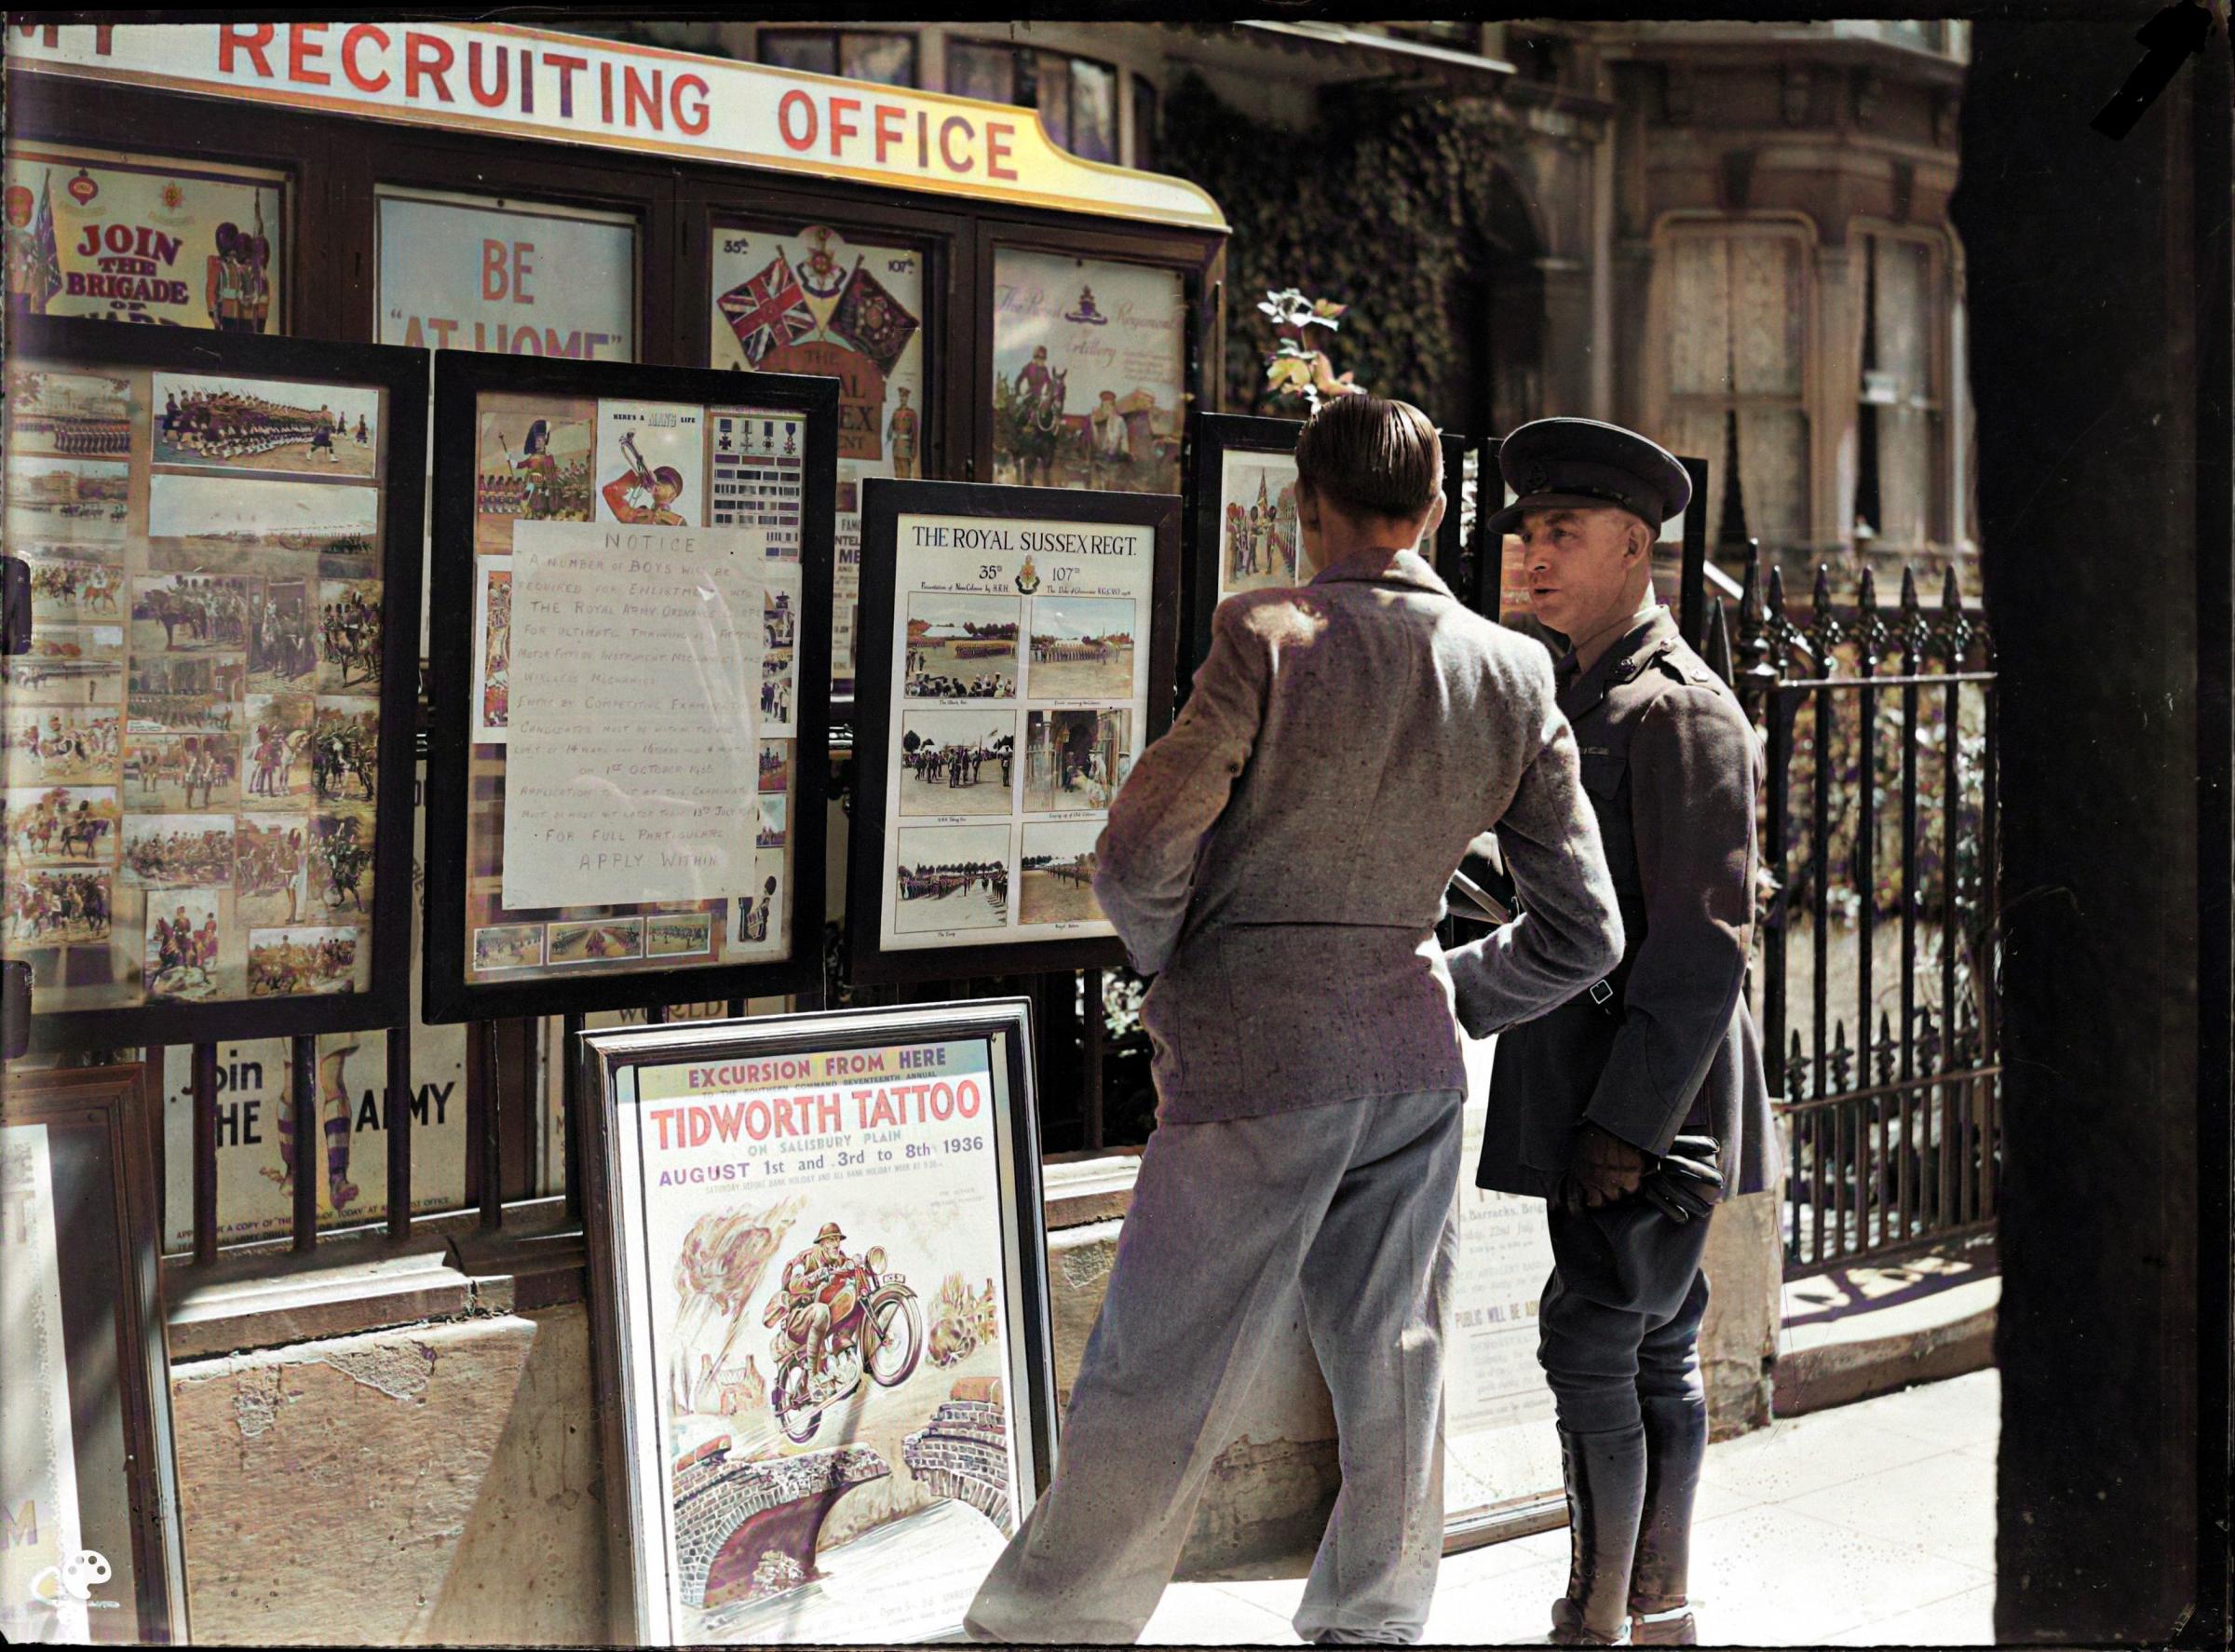 This is thought to be the Army Recruitment Office in Waterloo Place, Brighton, in about 1936